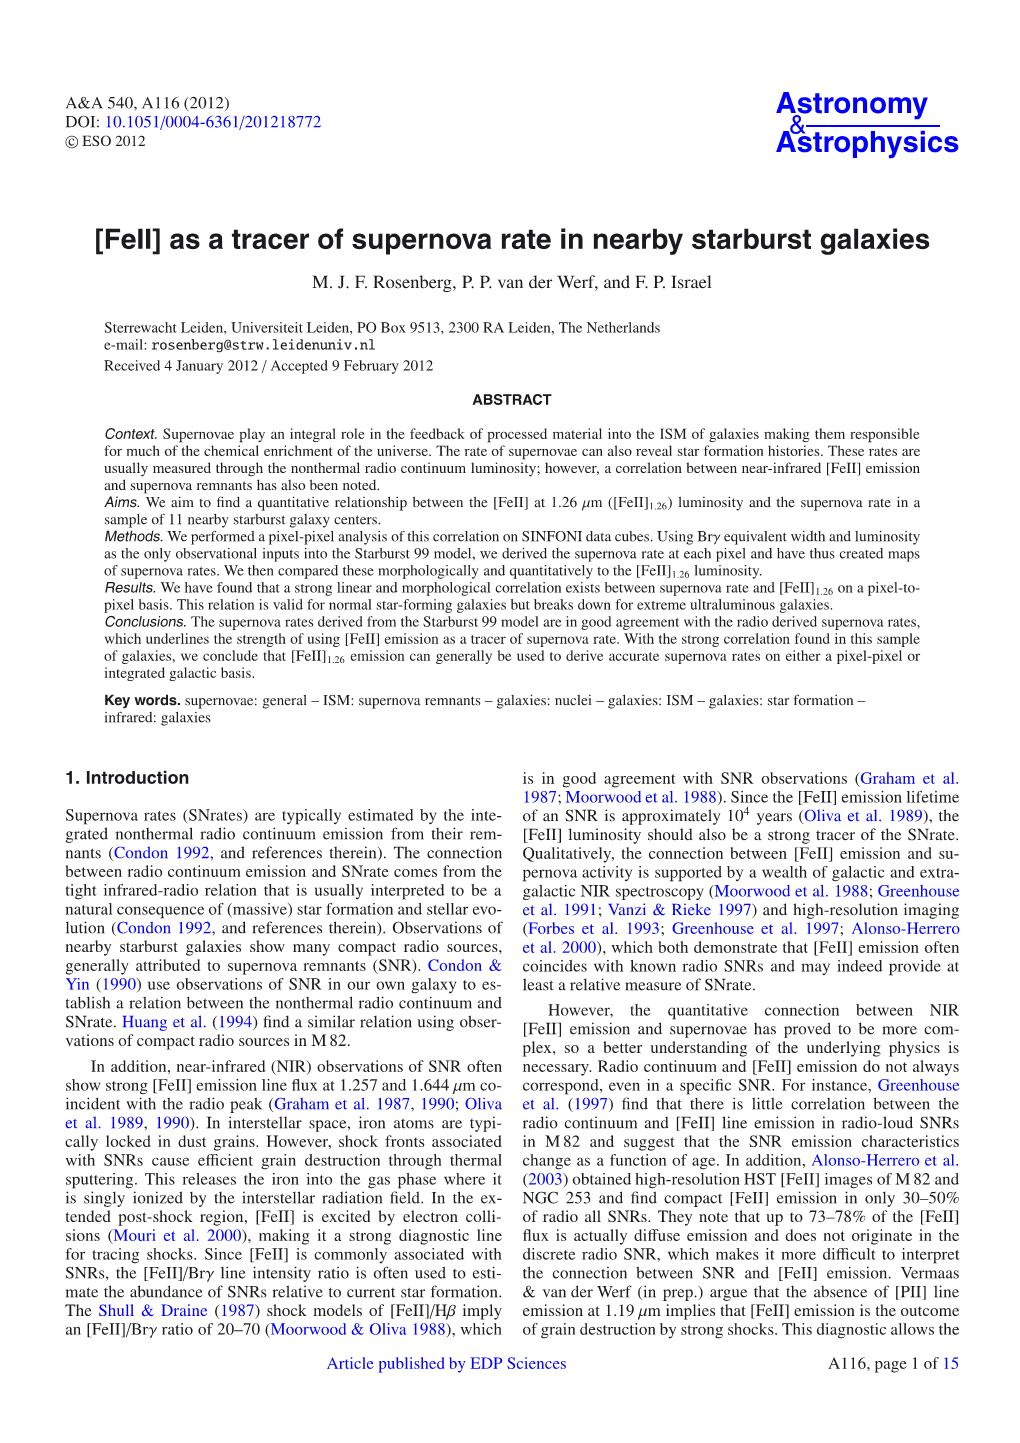 As a Tracer of Supernova Rate in Nearby Starburst Galaxies